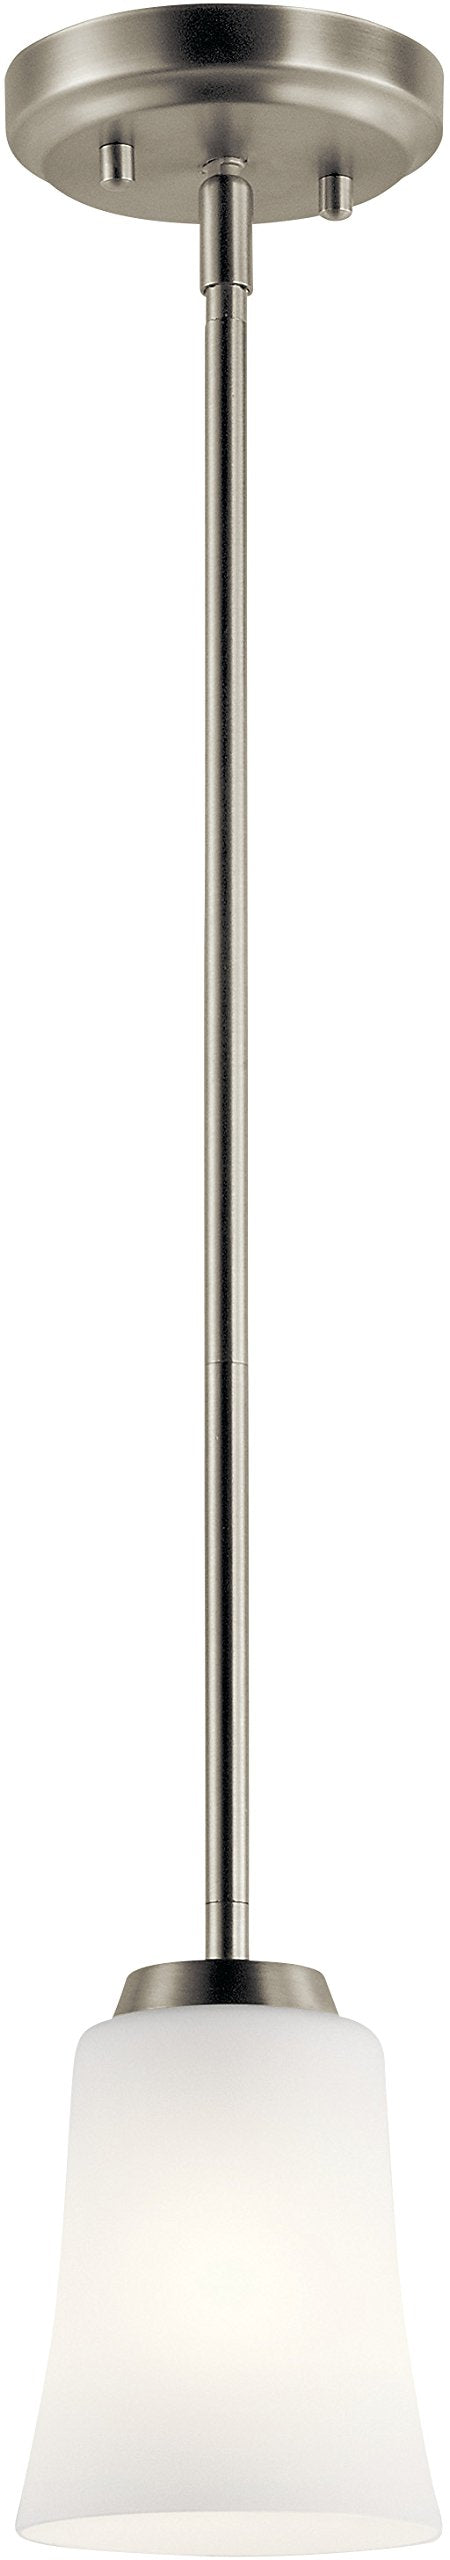 Kichler Lighting 44053NI One Light Mini Pendant from The Tao Collection, Brushed Nickel